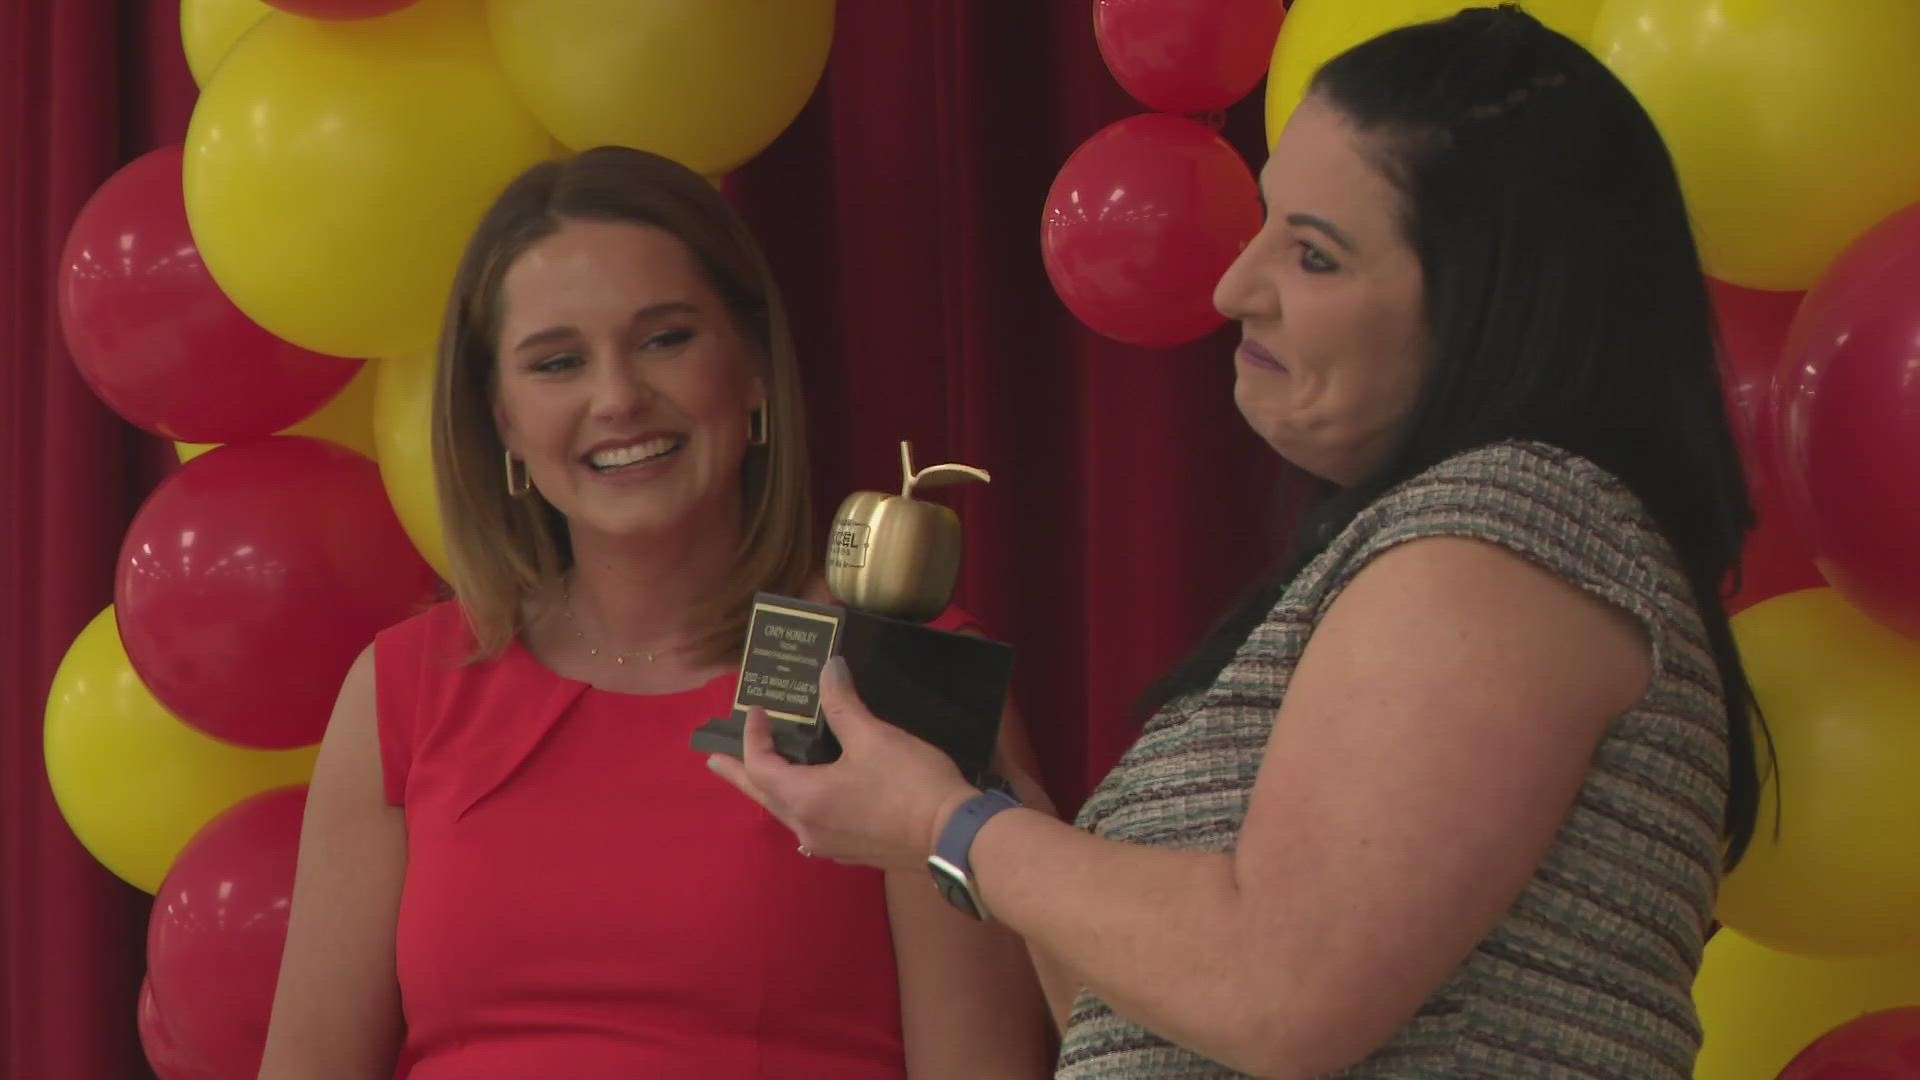 Cindy Hundley, a teacher with 29 years of experience, was honored with an ExCel award at Gutermuth Elementary.